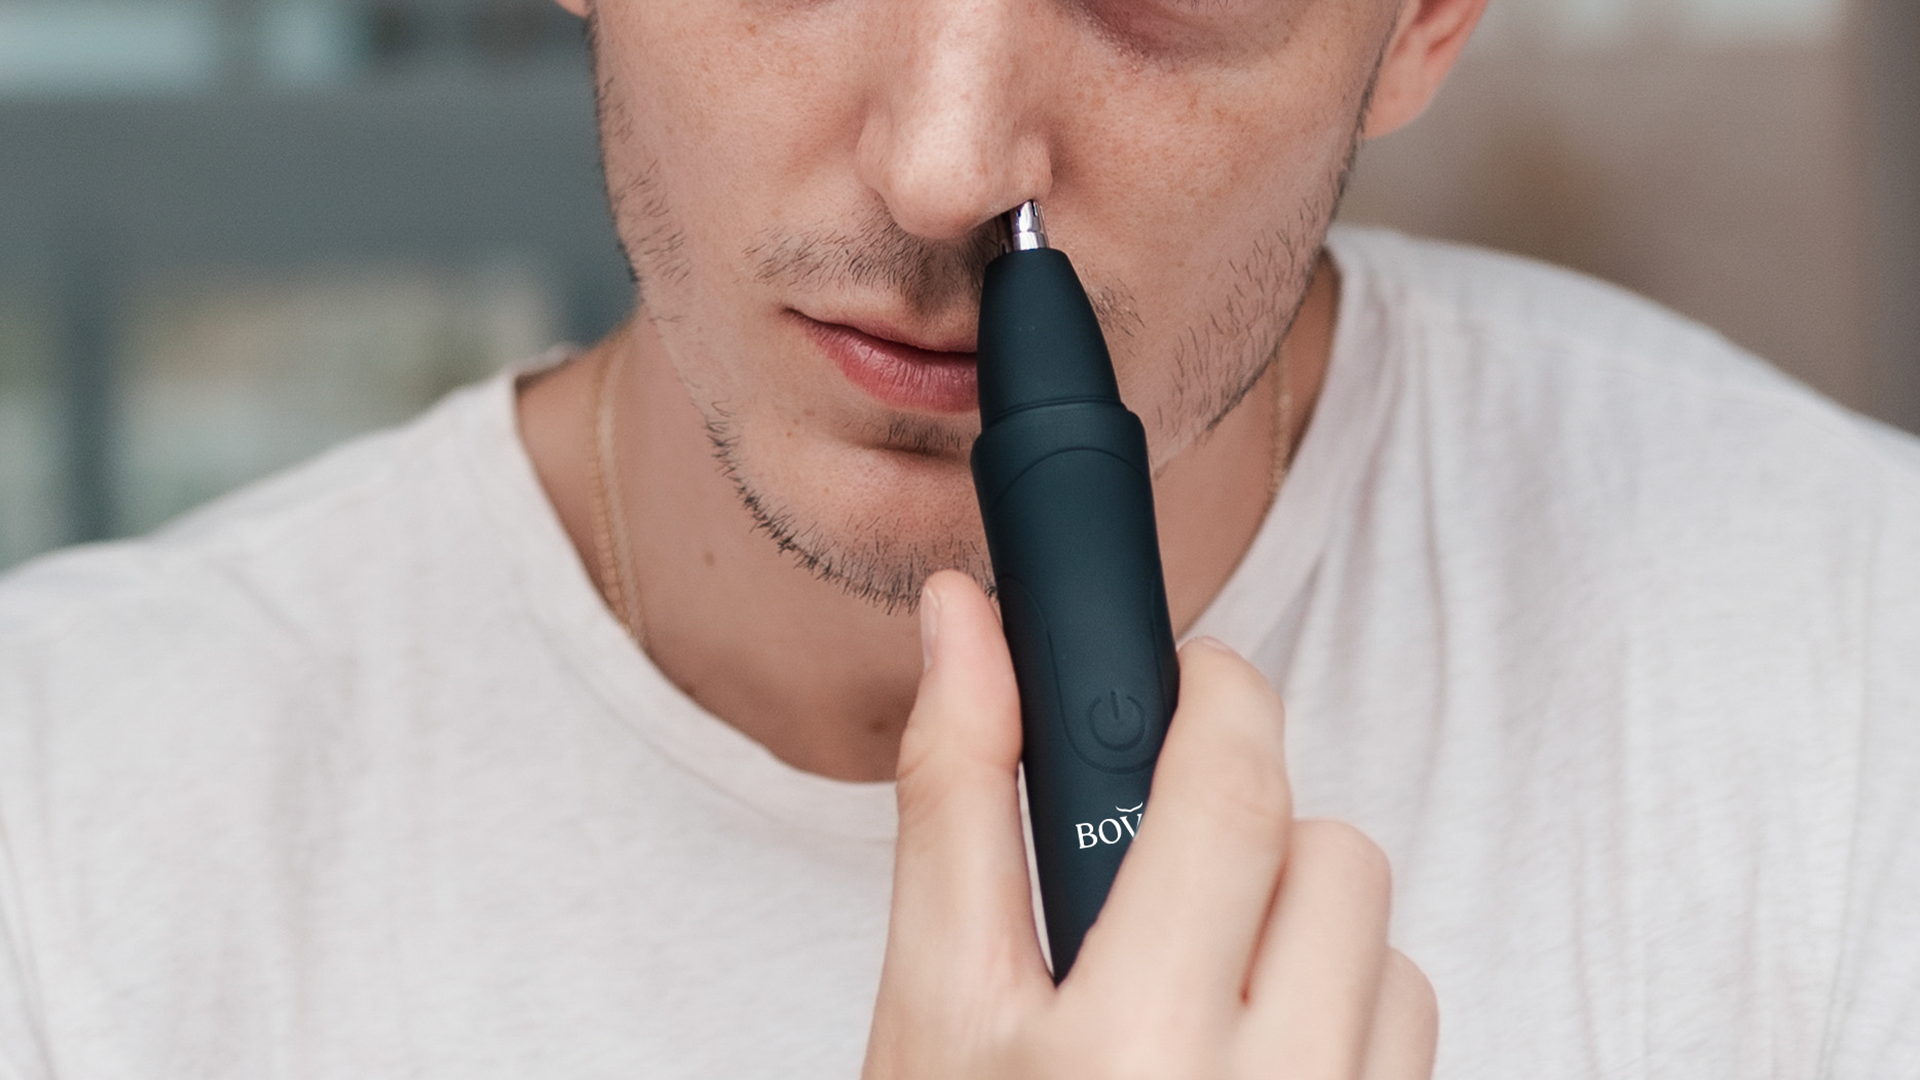 electric nose trimmer in hand being used in mirror